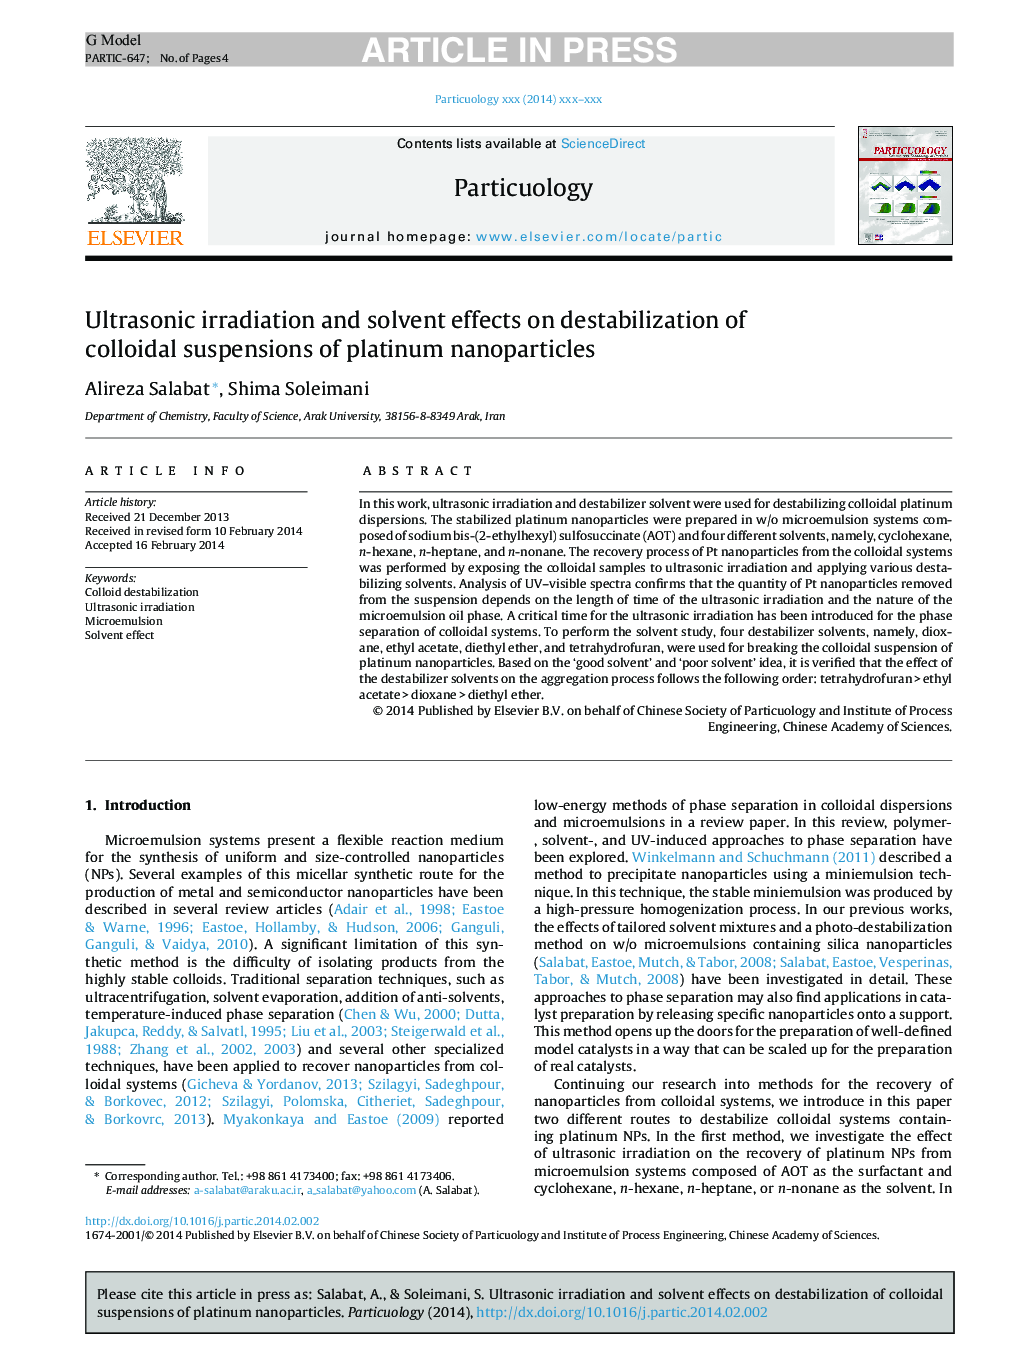 Ultrasonic irradiation and solvent effects on destabilization of colloidal suspensions of platinum nanoparticles